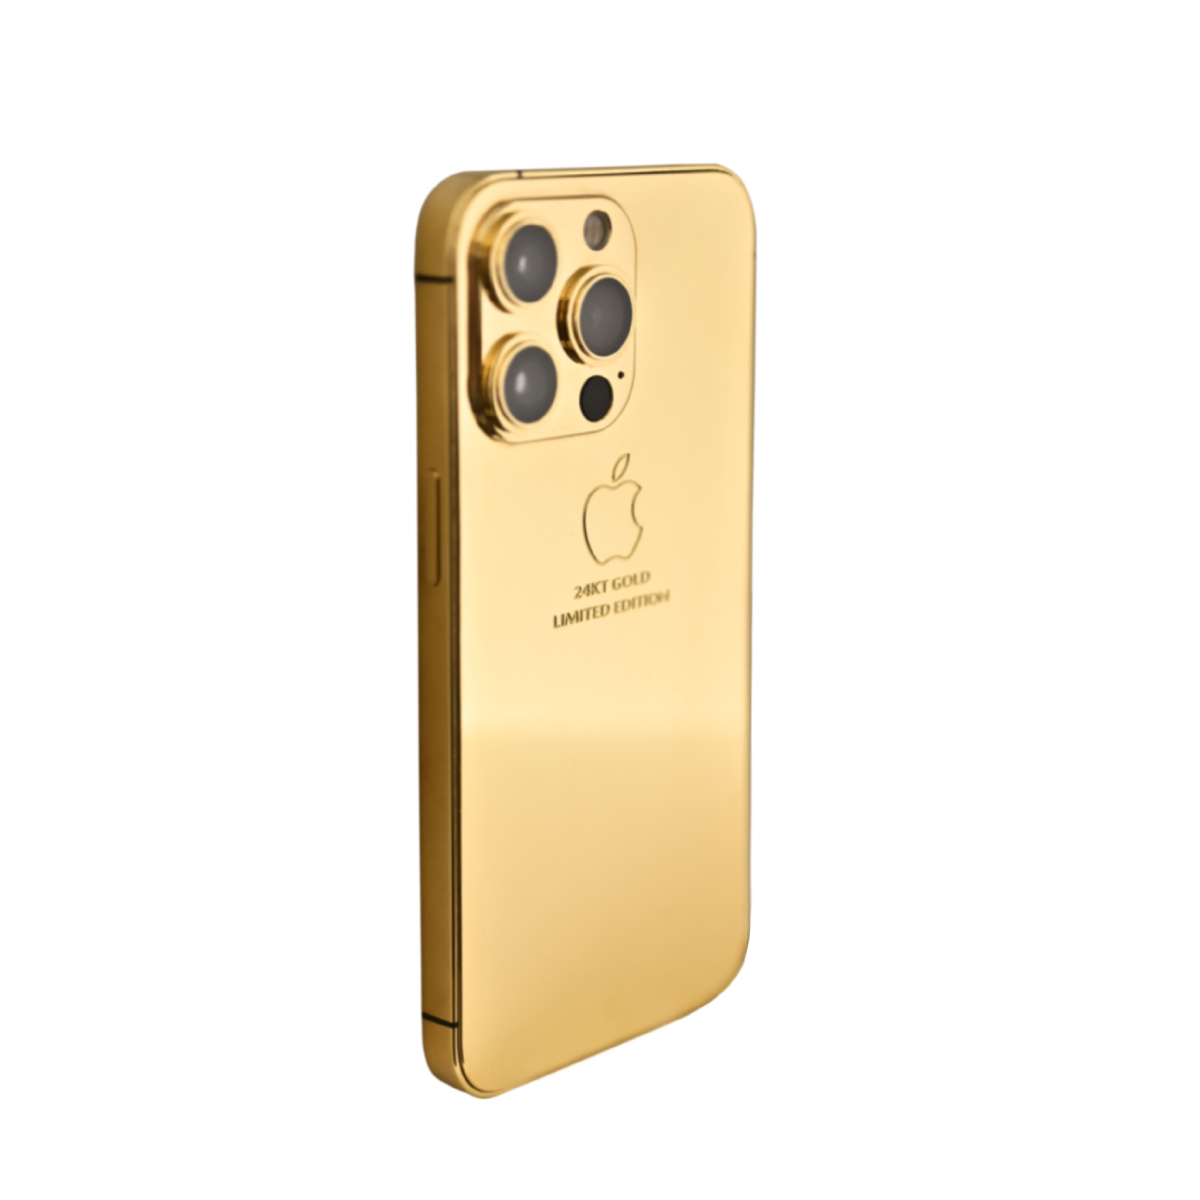 Caviar Luxury 24k Full Gold Customized iPhone 14 Pro 256 GB Limited Edition